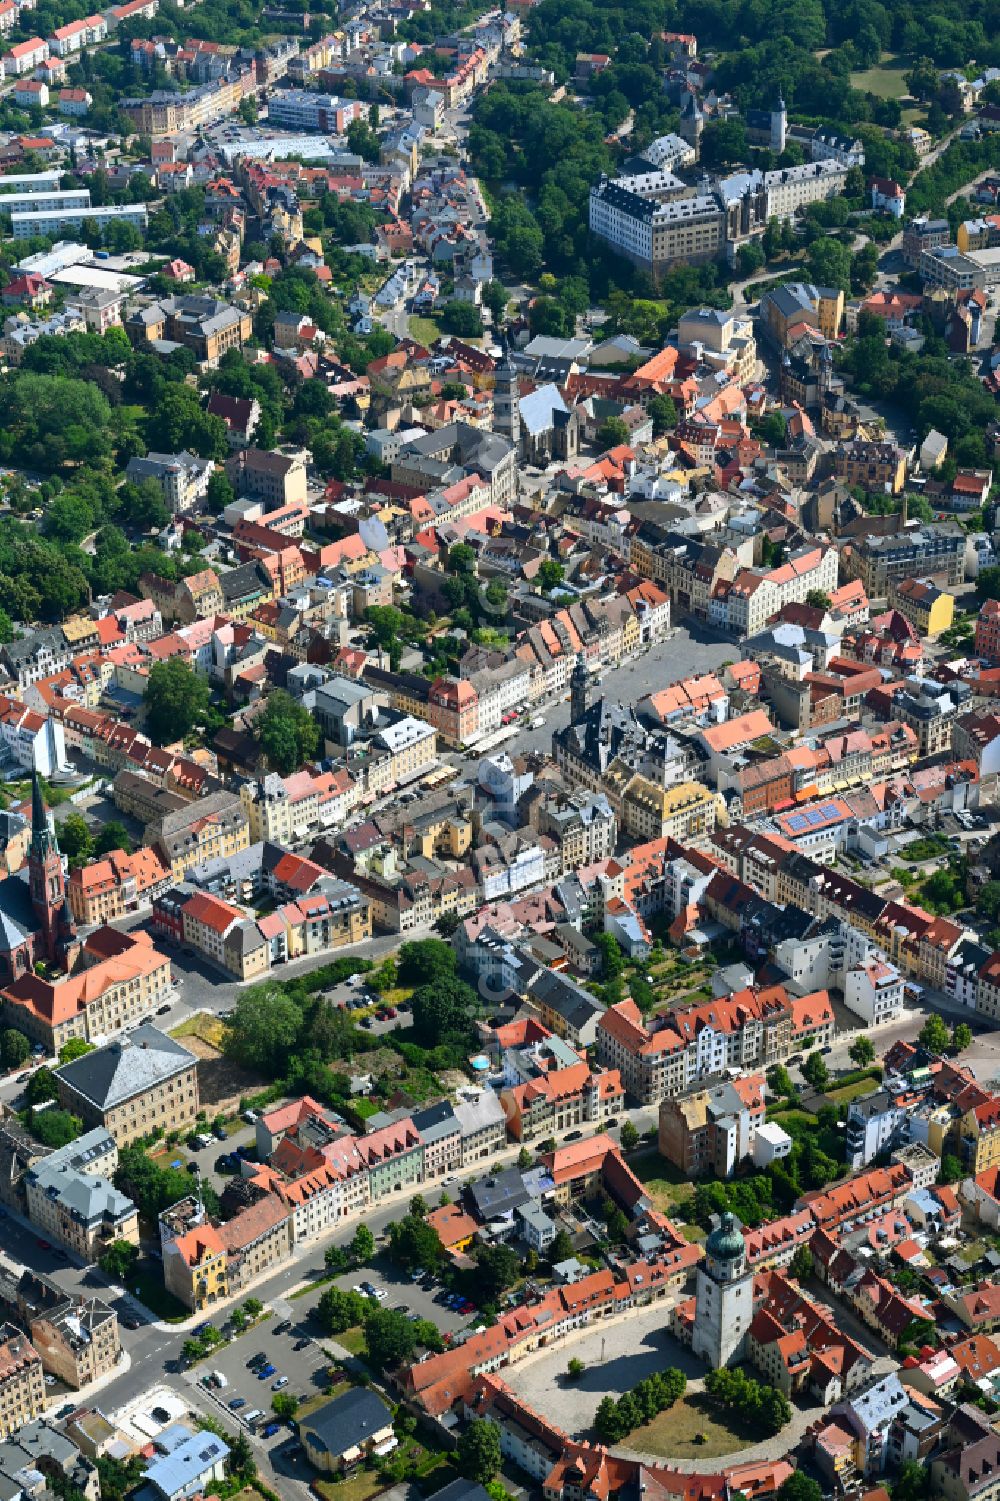 Aerial image Altenburg - The city center in the downtown area in Altenburg in the state Thuringia, Germany